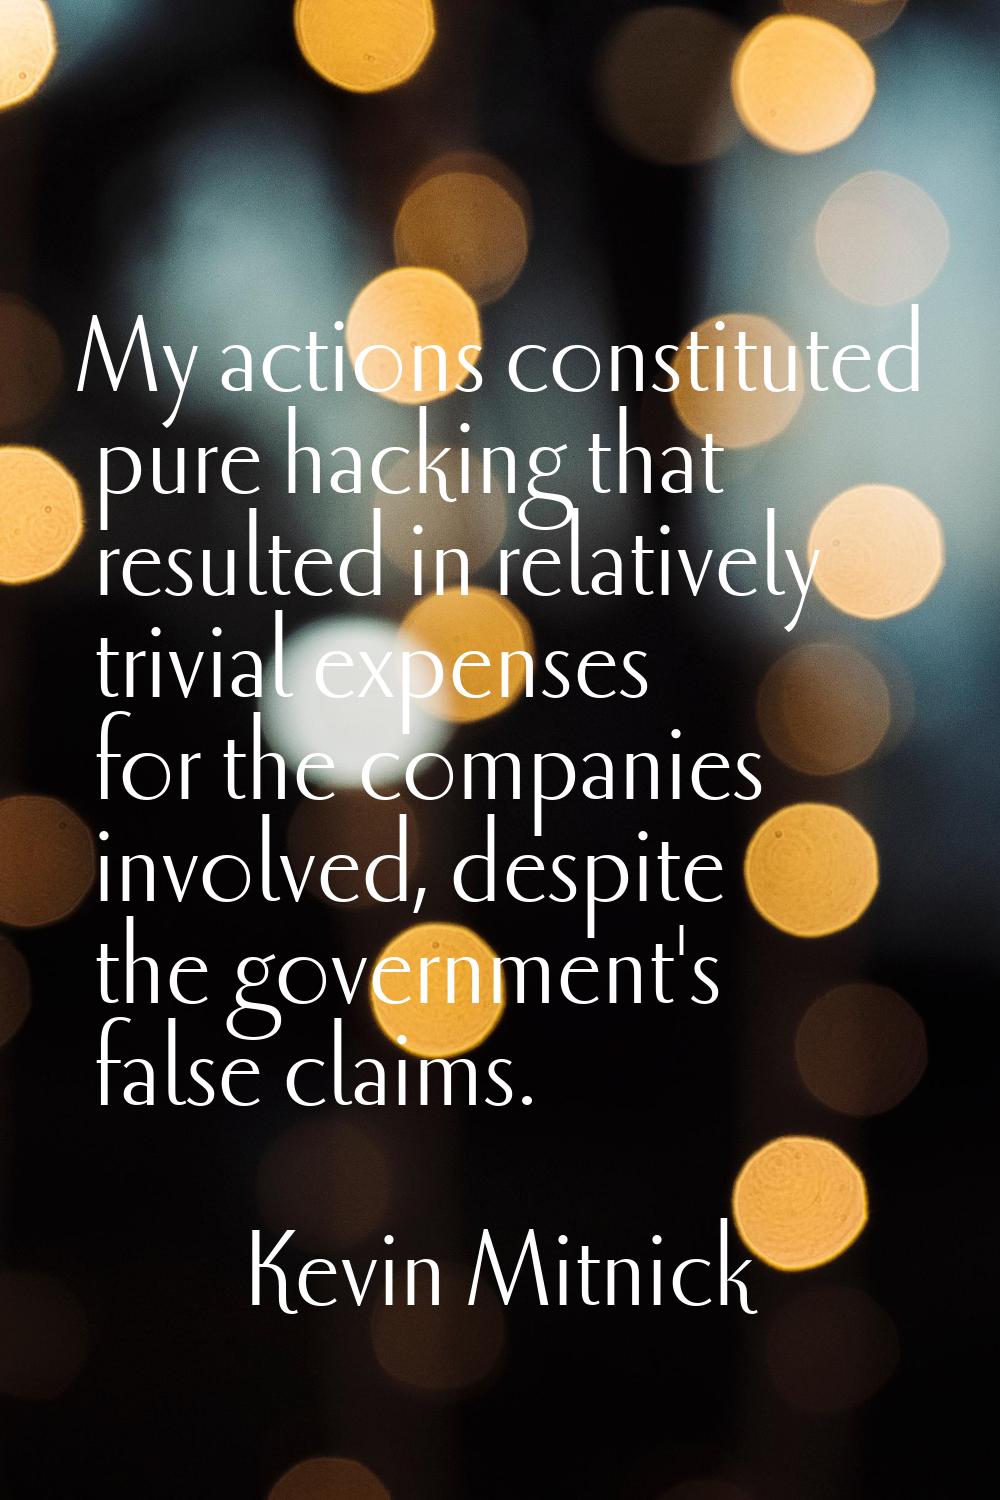 My actions constituted pure hacking that resulted in relatively trivial expenses for the companies 